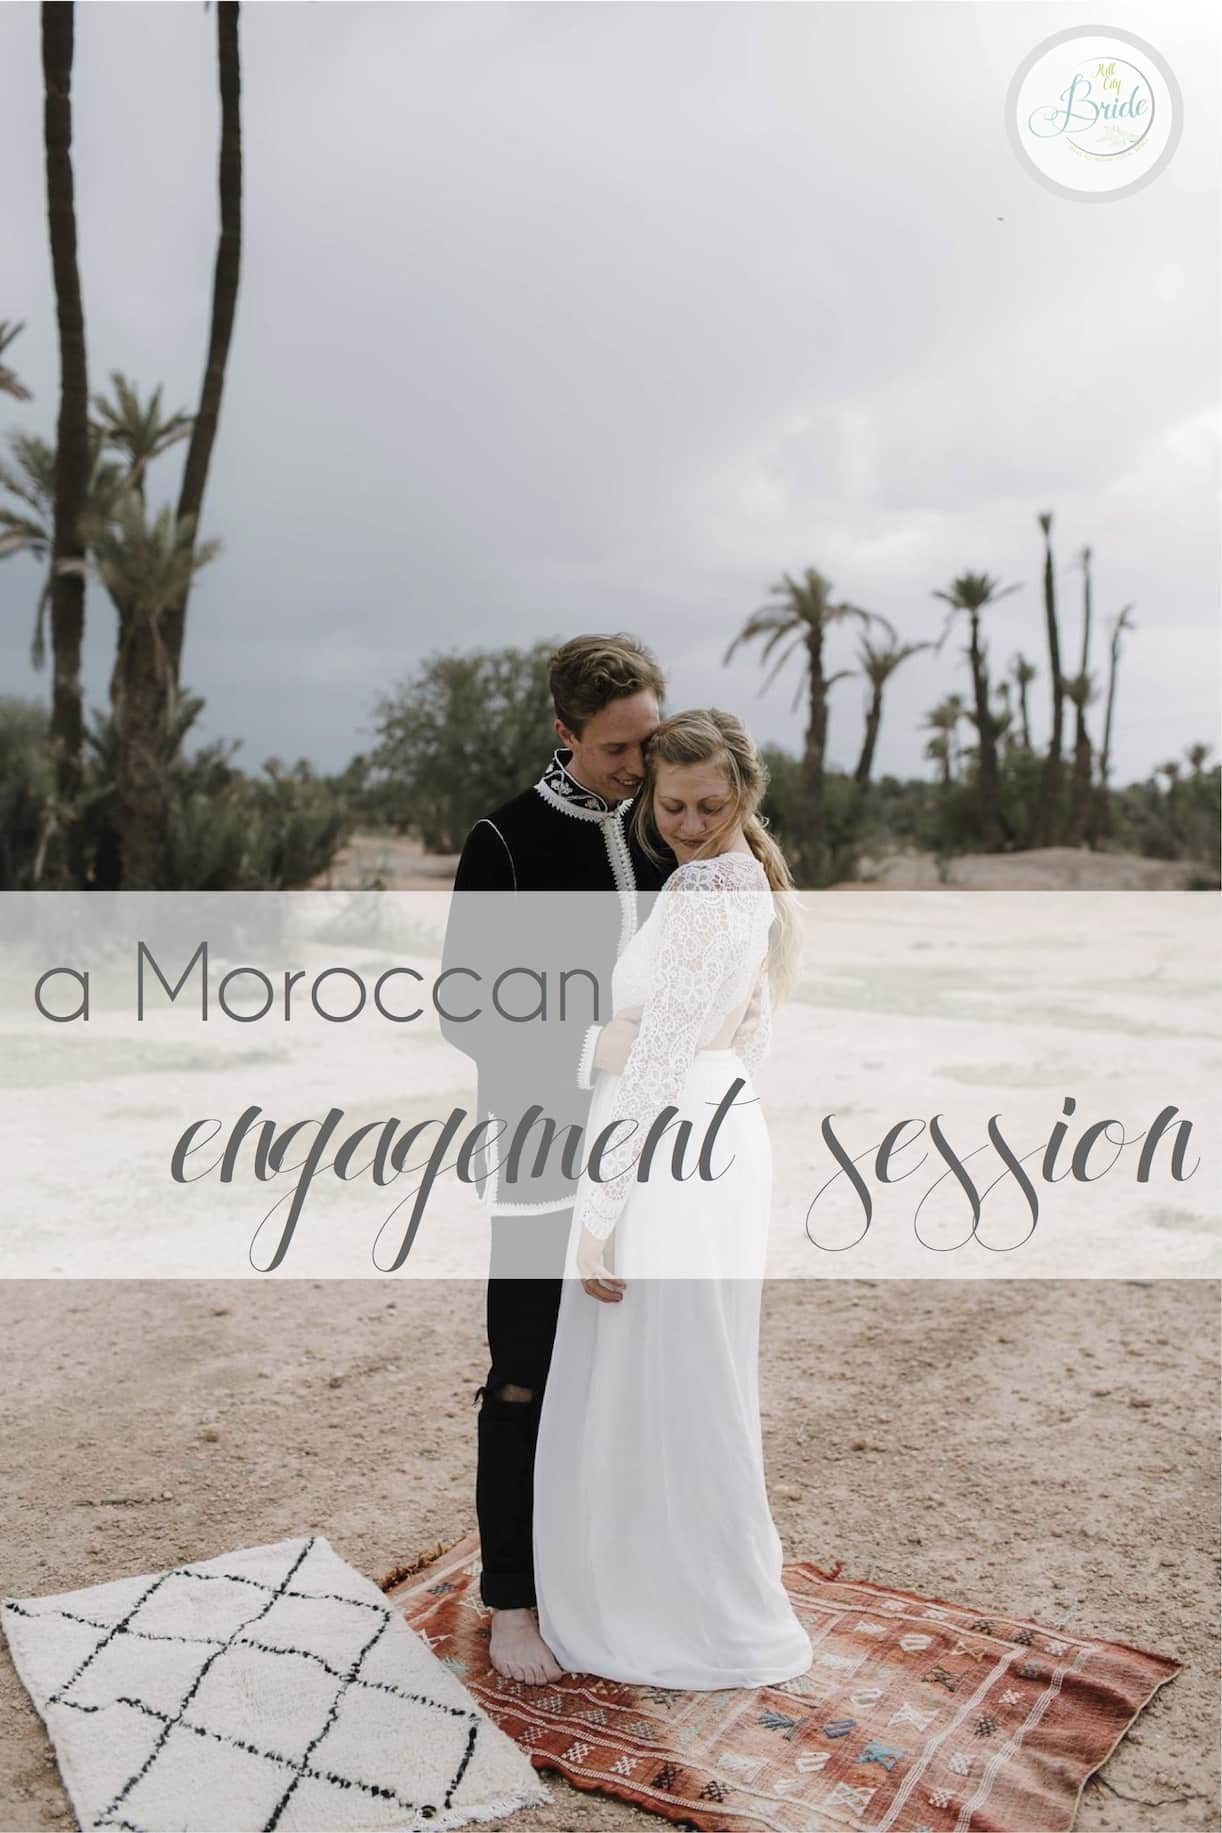 Moroccan Engagement Session as seen on Hill City Bride Wedding Travel Blog E-session - desert, camel, africa